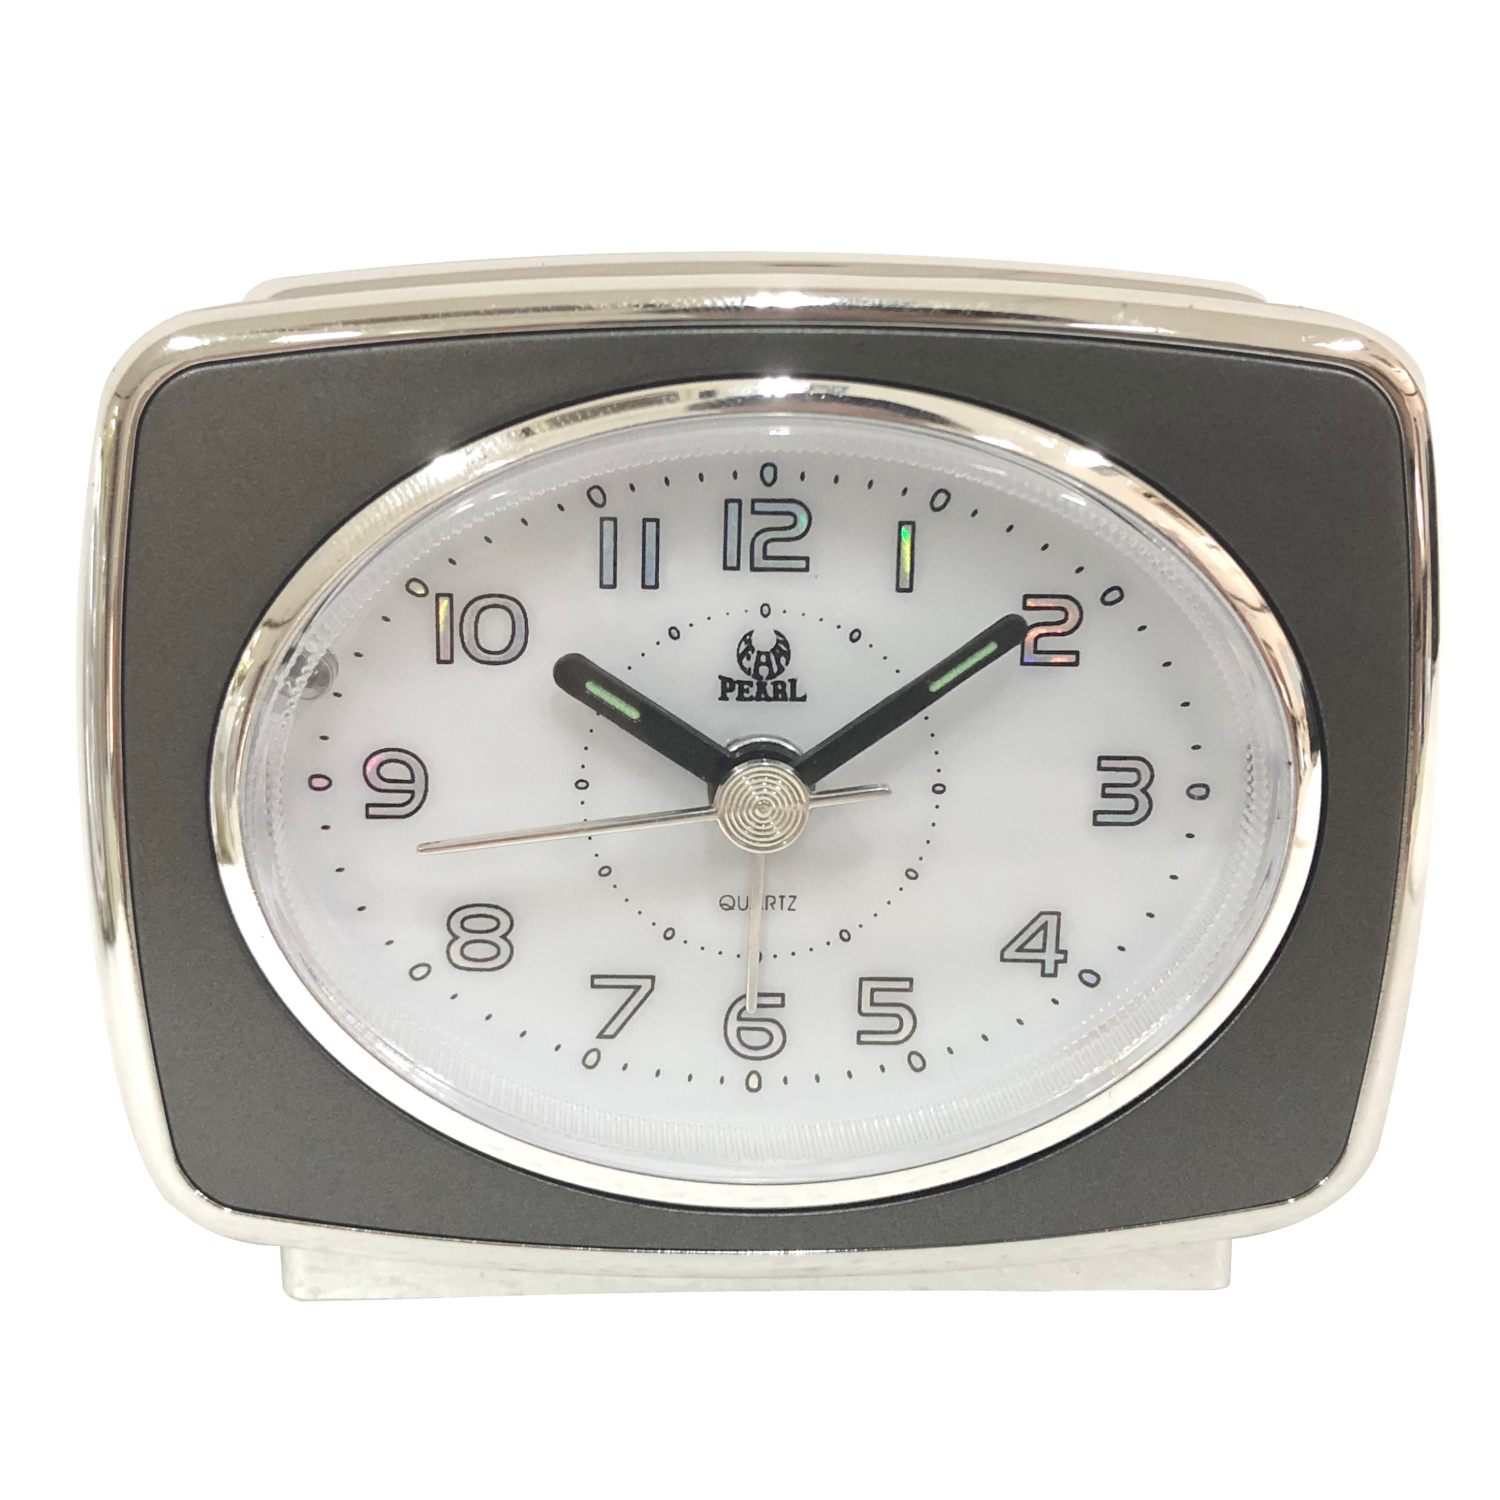 PT160-GRY Table alarm clock in grey